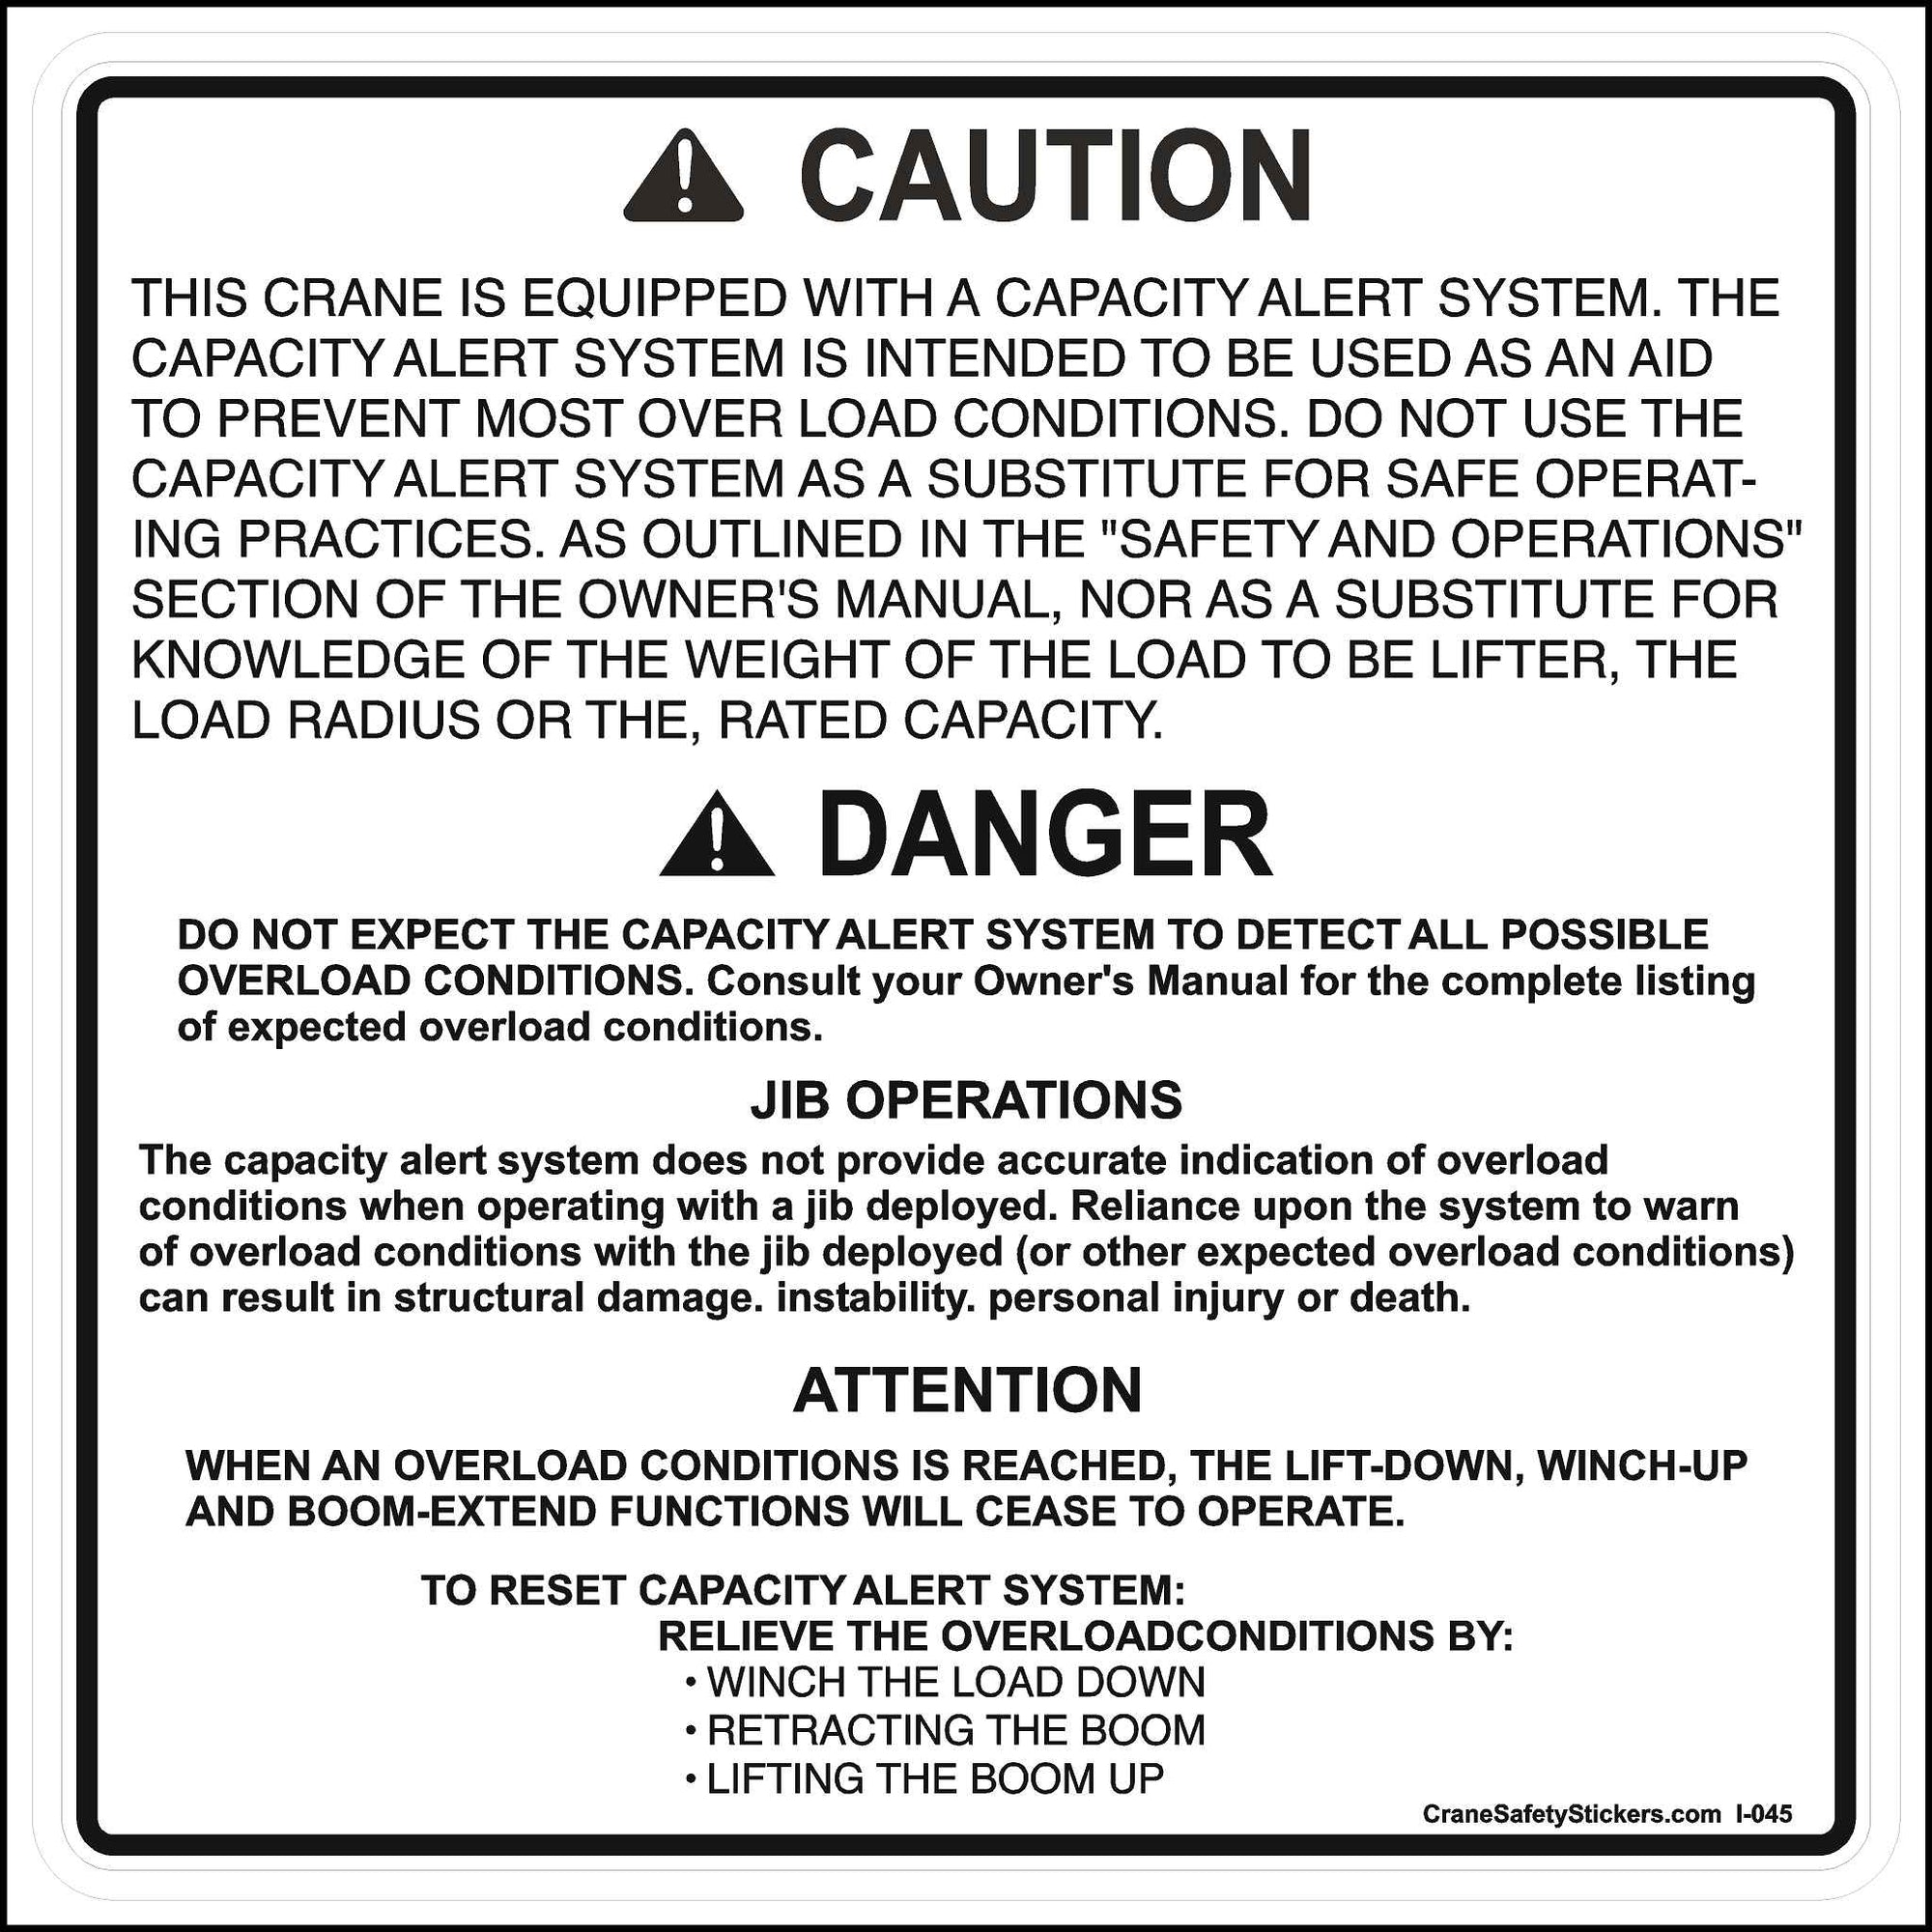 Capacity Alert System Sticker For Cranes printed in black text with a white background.